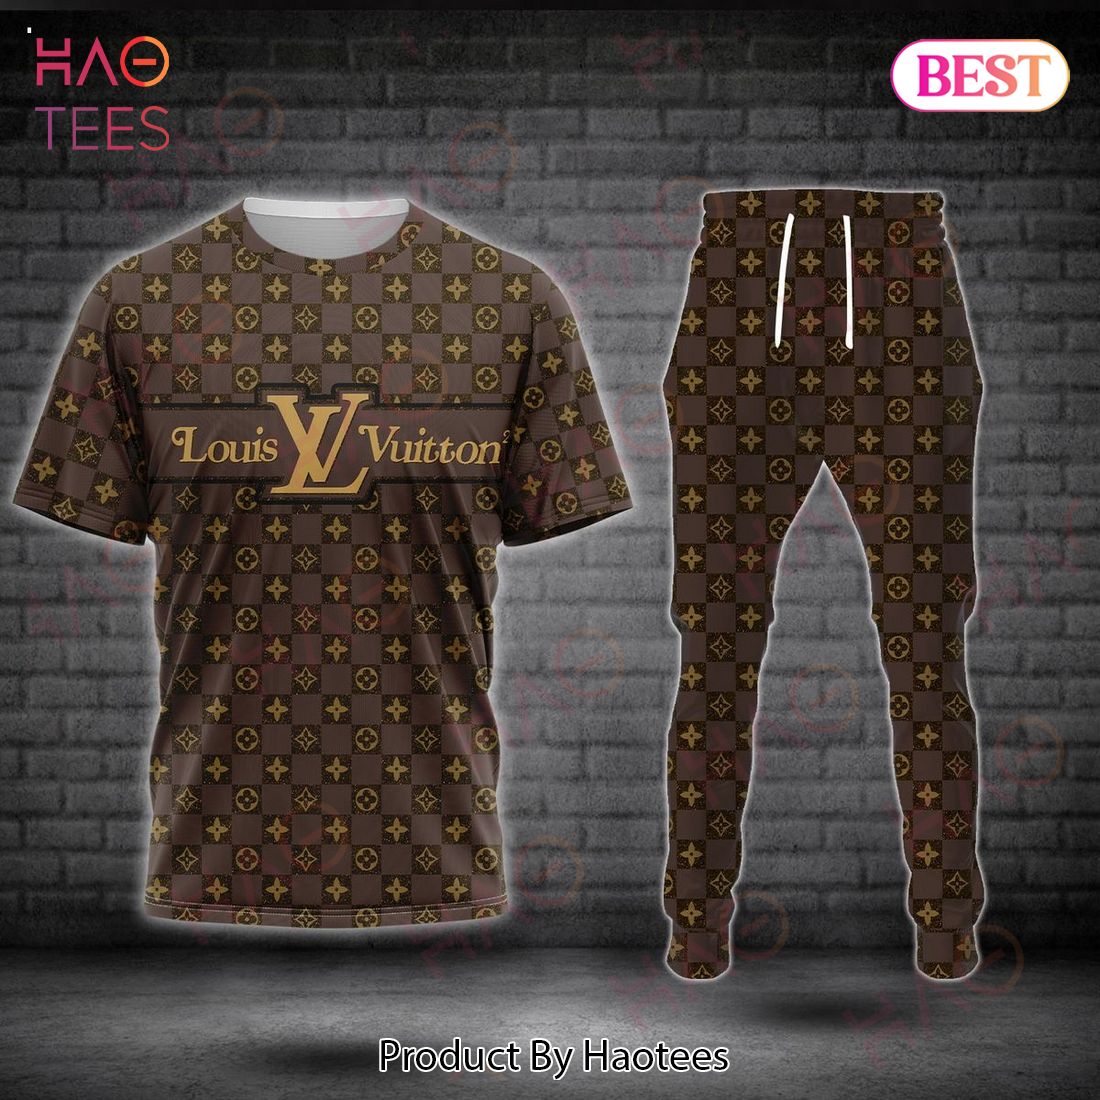 Louis Vuitton Brown Color Luxury Brand T-Shirt And Pants Limited Edition